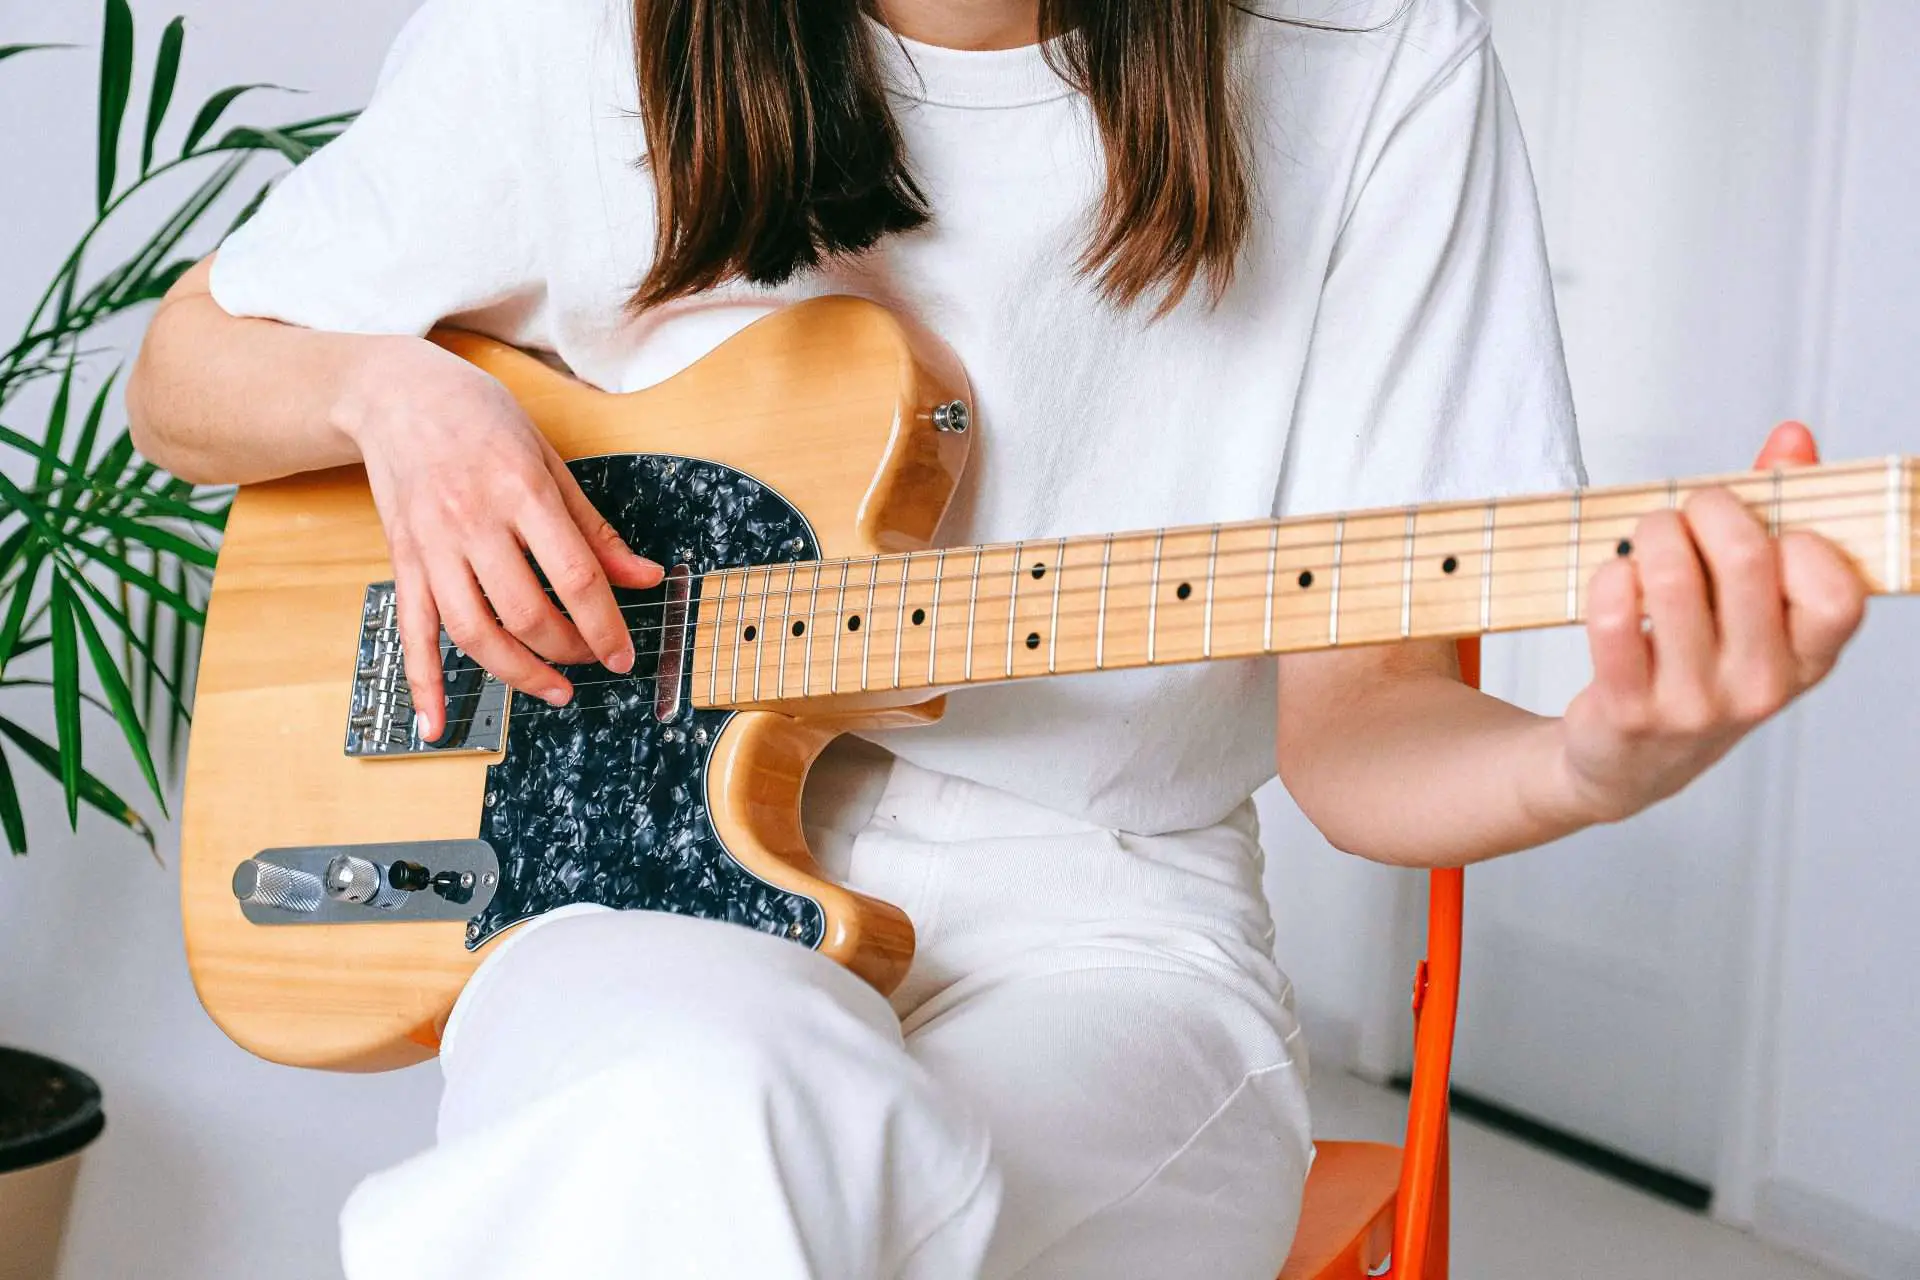 girl playing a fender telecaster anna shvets - diminished chords, high e string, new tab, arpeggios, styles, playing